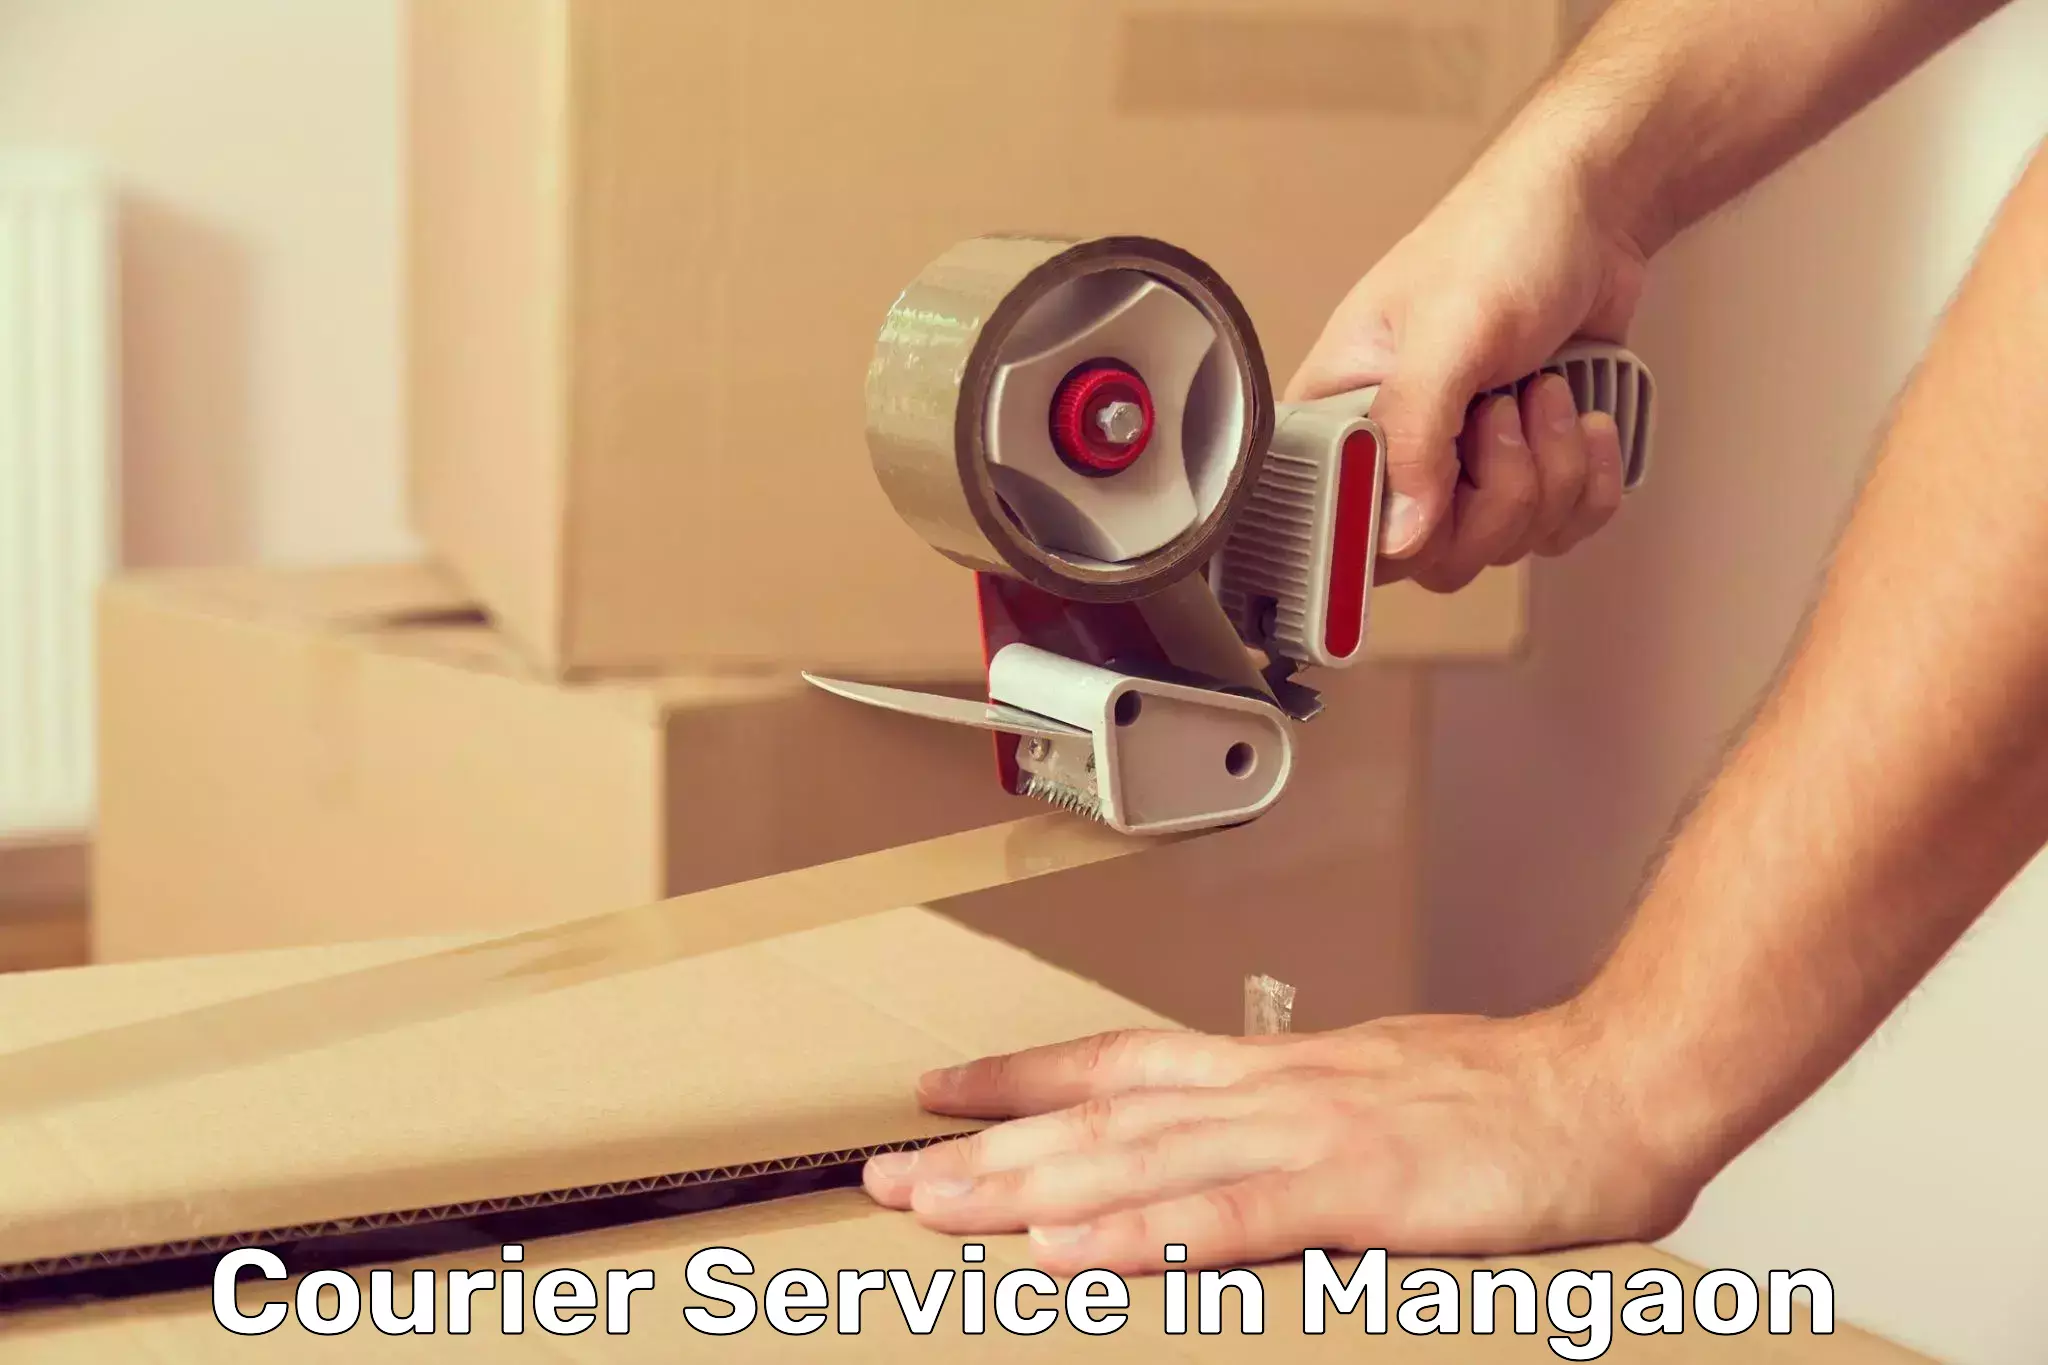 Courier insurance in Mangaon